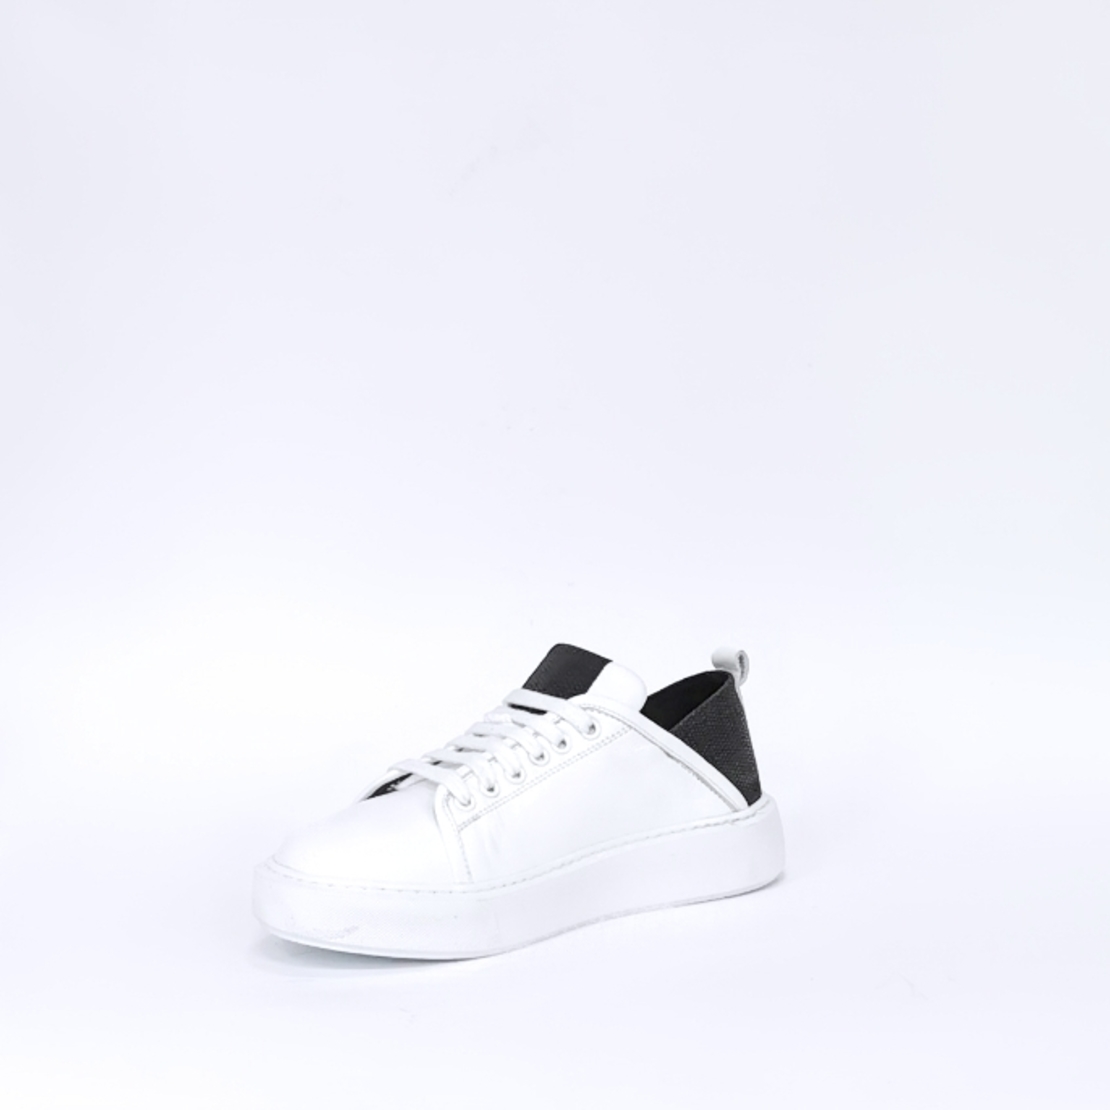 Women's sneaker made of natural leather in white color with anatomical insole/72100